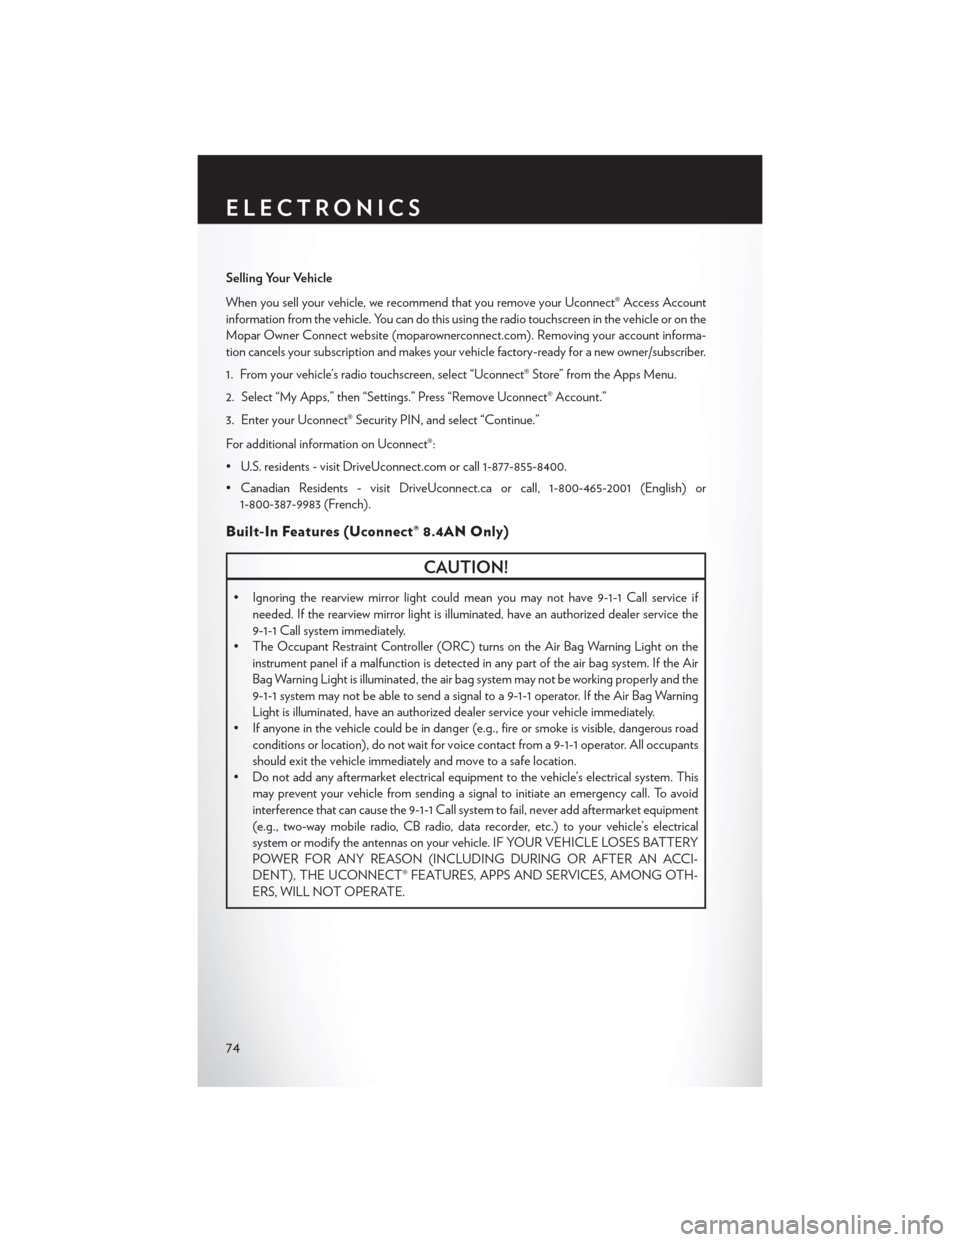 CHRYSLER 200 2015 2.G Manual PDF Selling Your Vehicle
When you sell your vehicle, we recommend that you remove your Uconnect® Access Account
information from the vehicle. You can do this using the radio touchscreen in the vehicle or